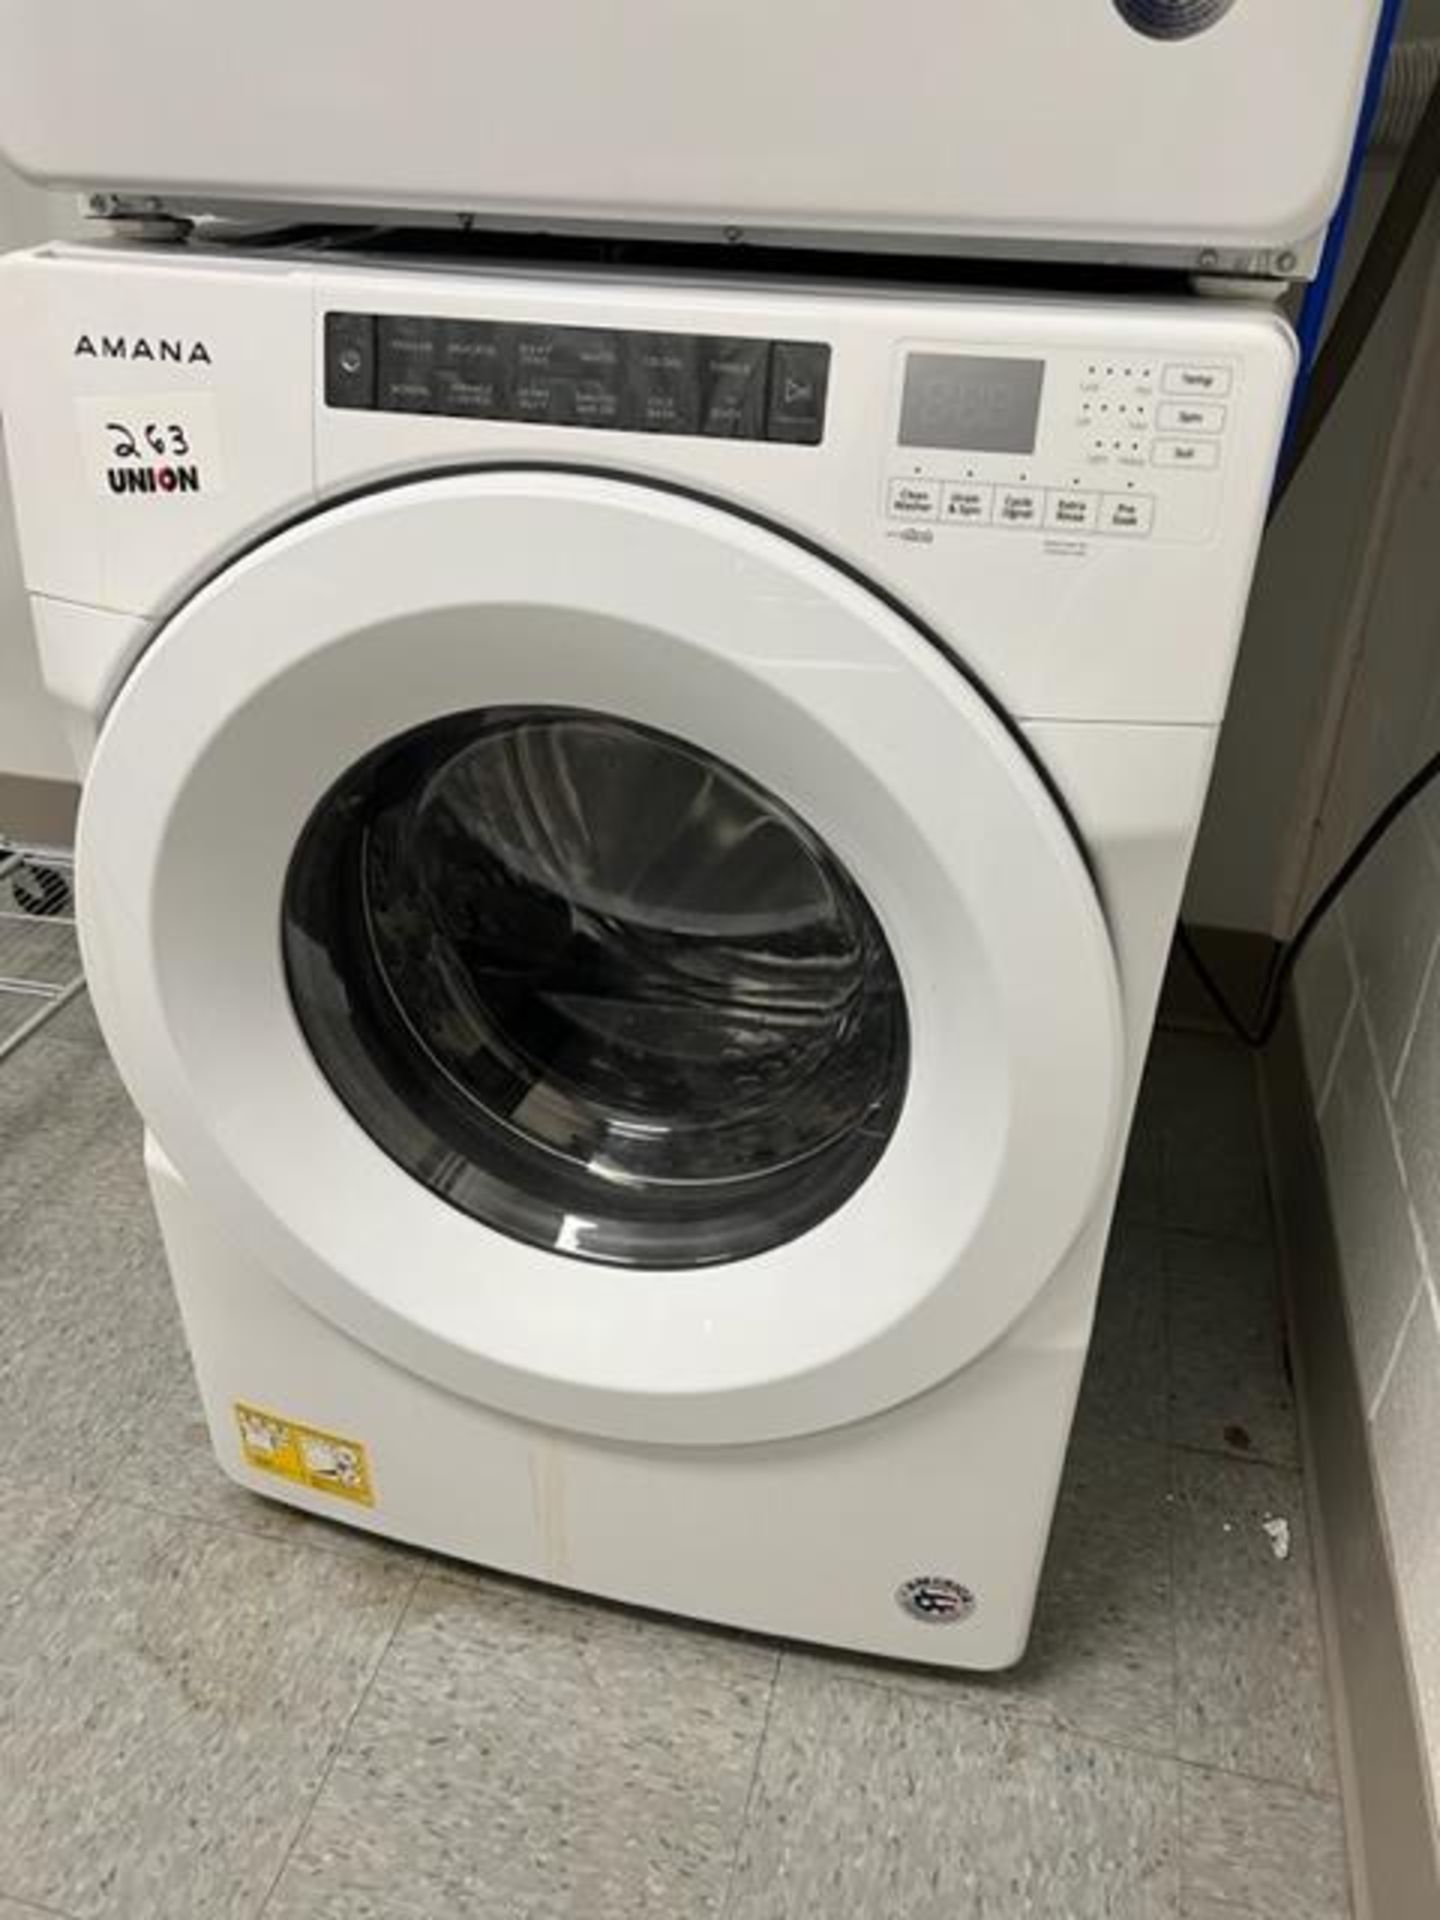 Asset 262 - Amana Washer type NFW5800HW2. $345.00 Rigged and packed on 48" x 40" pallet banded and - Image 2 of 5